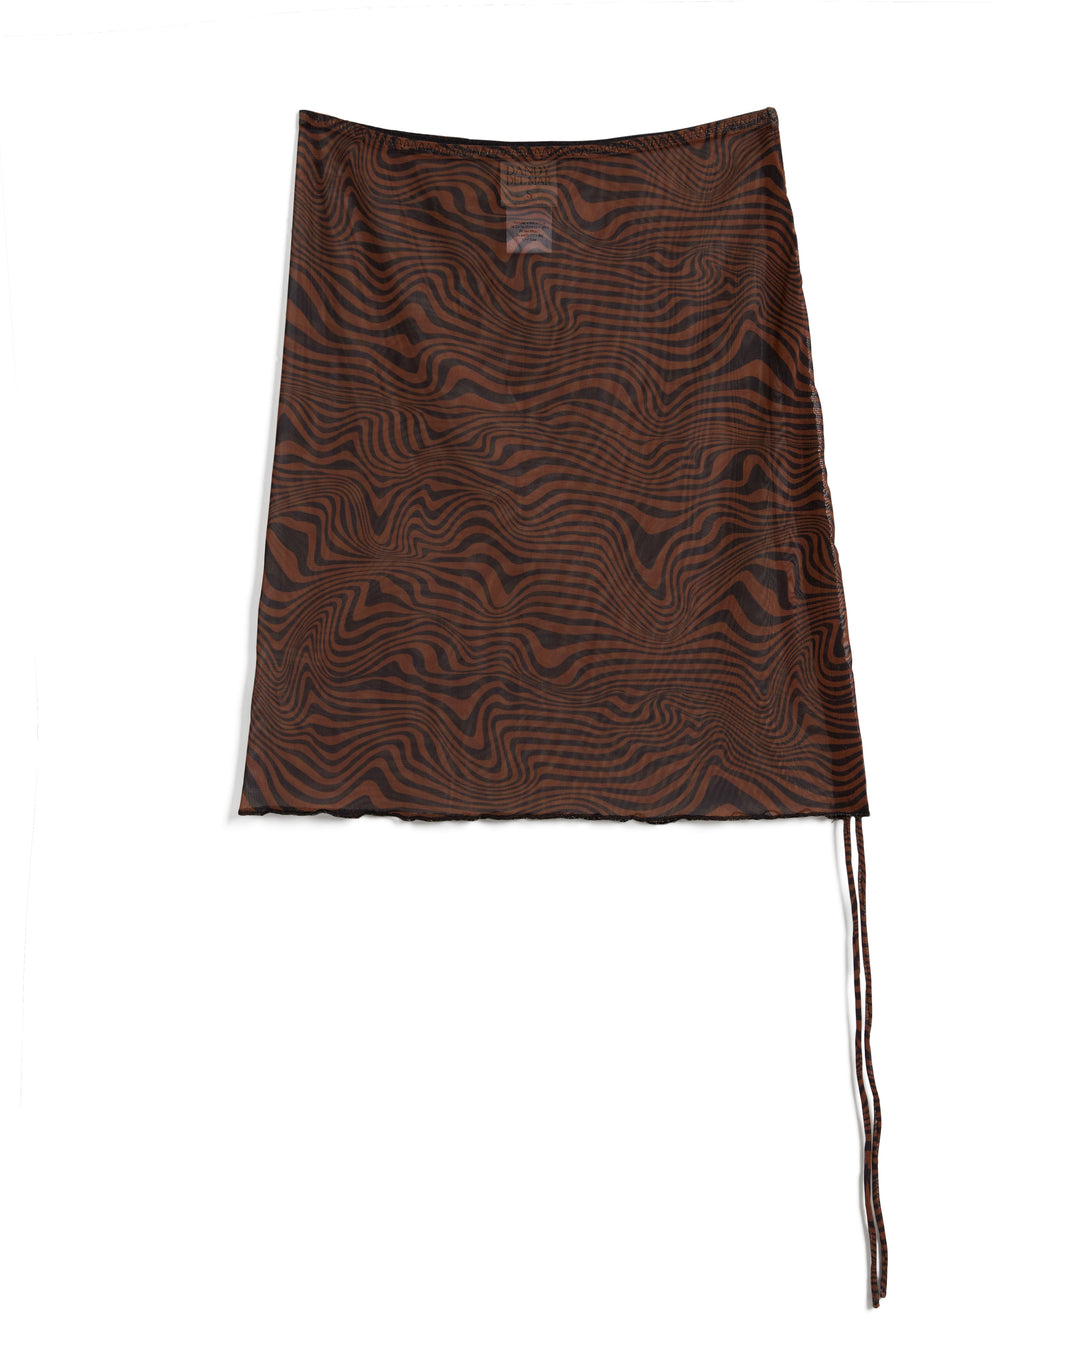 A brown and black patterned The Athena Skirt - Onyx mini skirt from Dandy Del Mar with a wrap design and strings hanging from the bottom right corner, made of airy mesh fabric, lying flat on a plain white background.